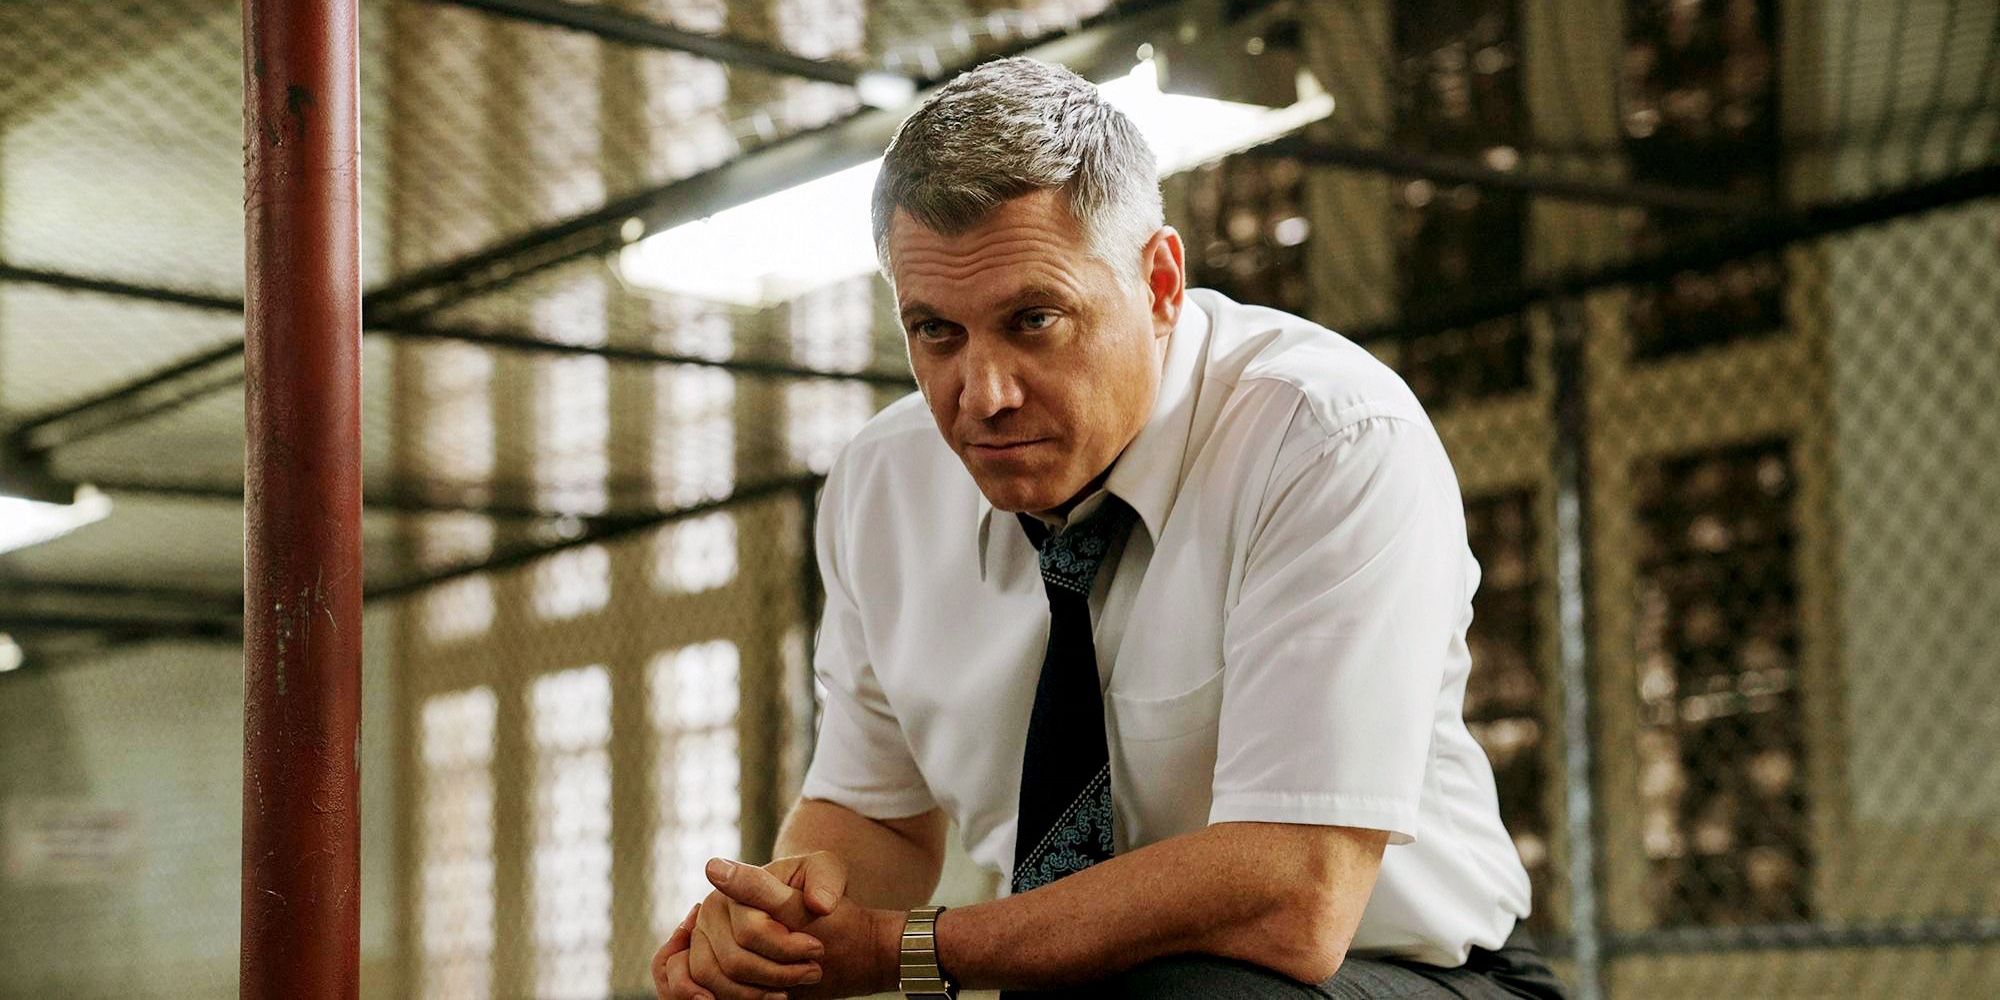 Mindhunter Holt McCallany as Bill Tench